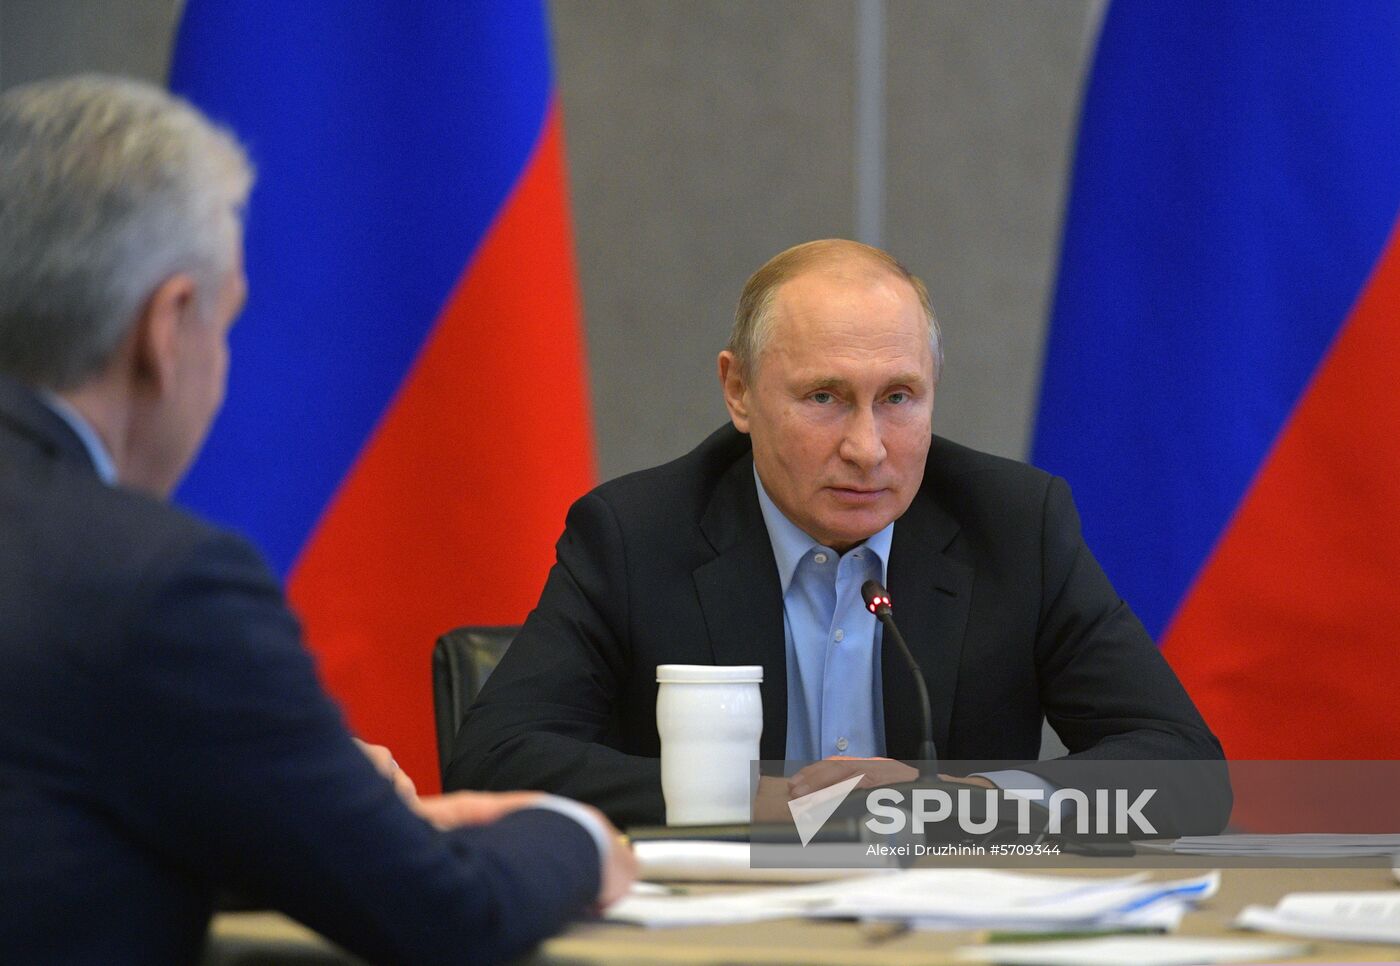 President Putin's working trip to Southern Federal District